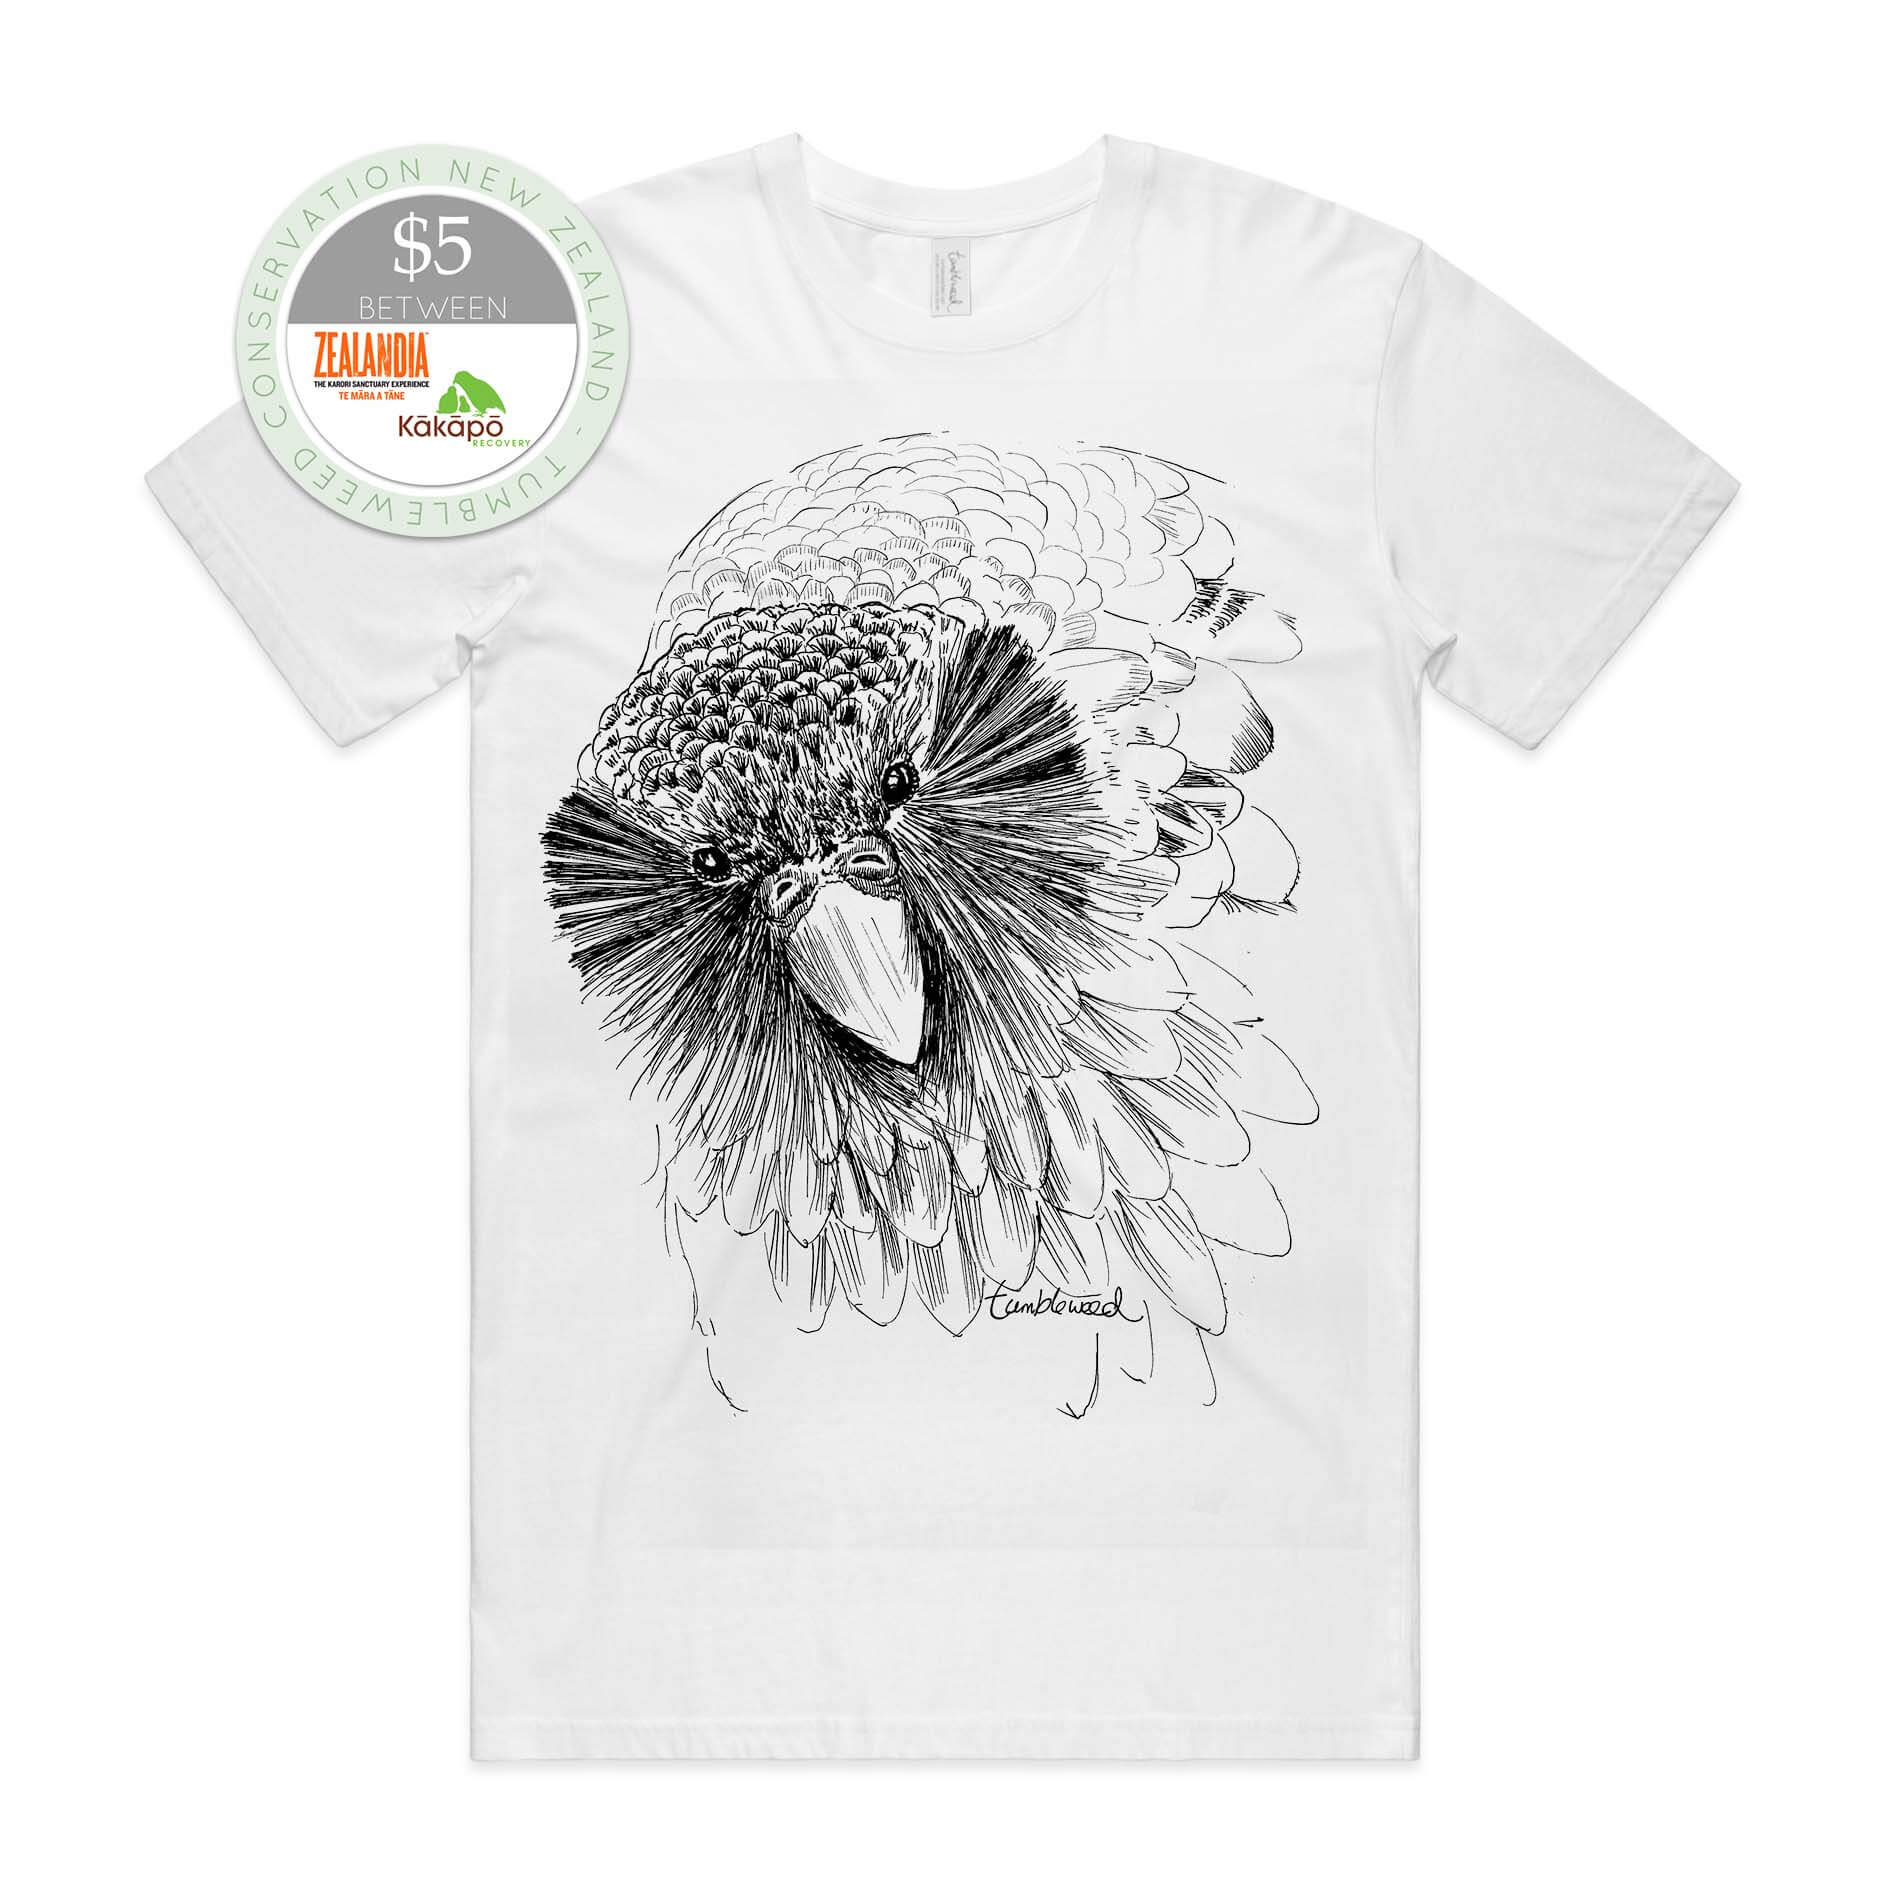 Grey marle, female t-shirt featuring a screen printed Sirocco the Kākāpō design.